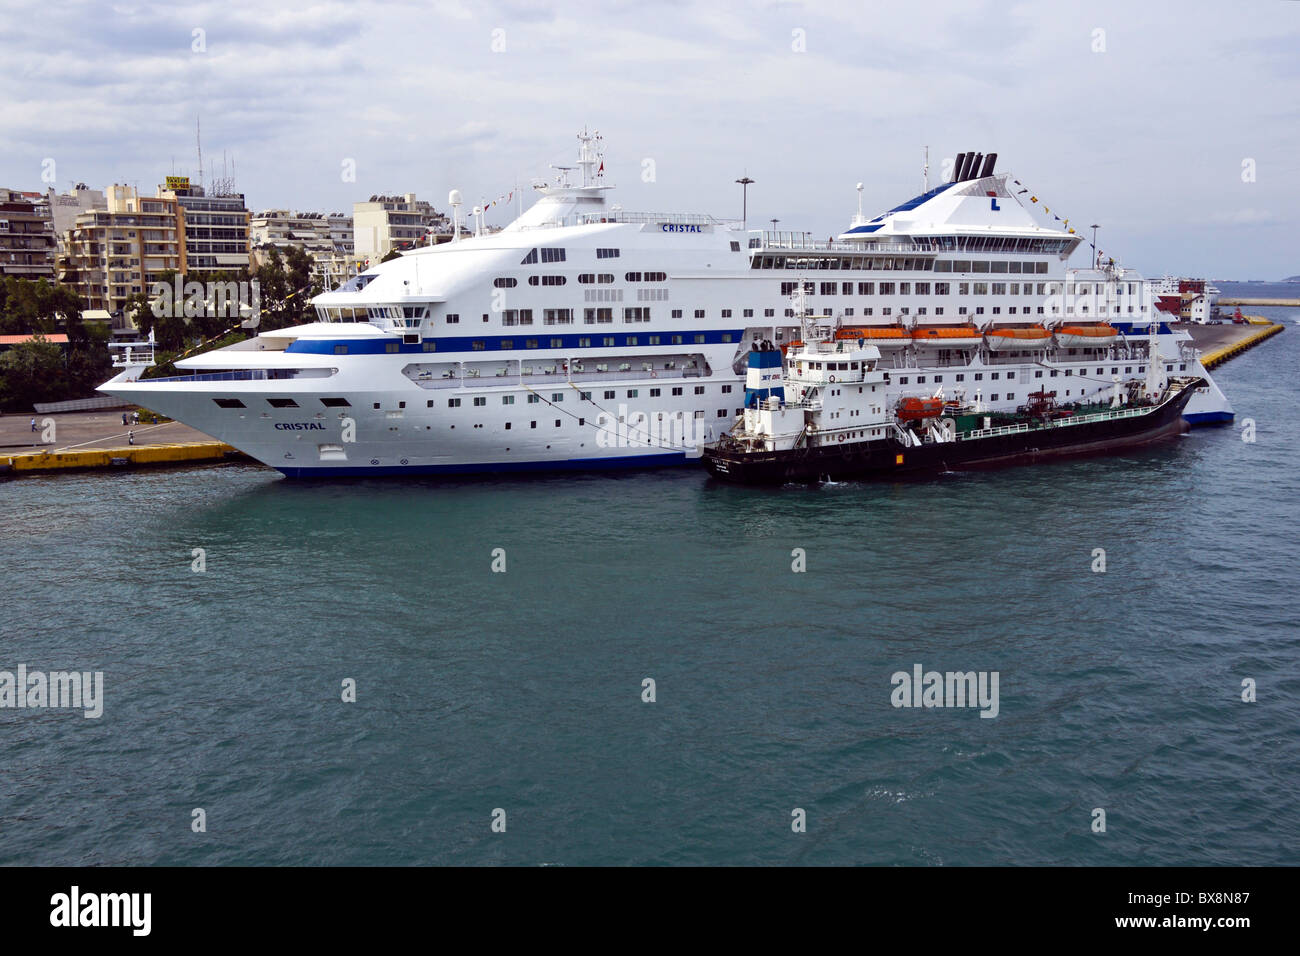 Louis Cruise Lines cruise ship Cristal being fuelled in Piraeus harbour Greece Stock Photo